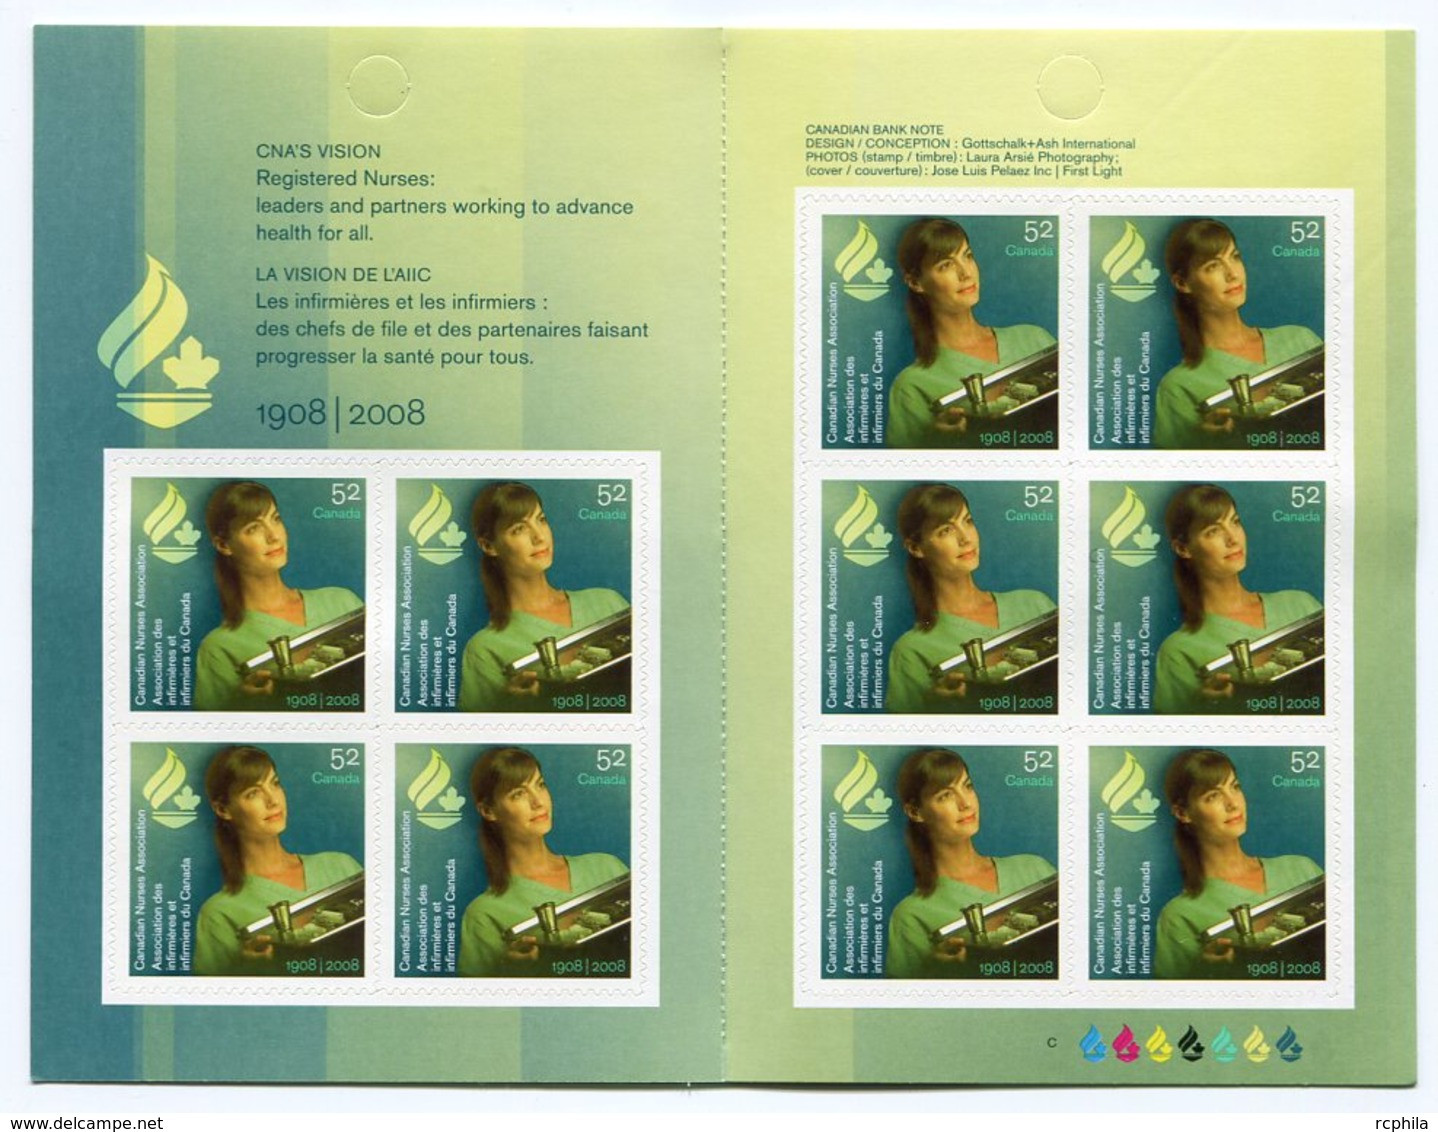 RC 11570 CANADA 2008 INFIRMIÈRES NURSES BOOKLET MNH NEUF ** - Full Booklets